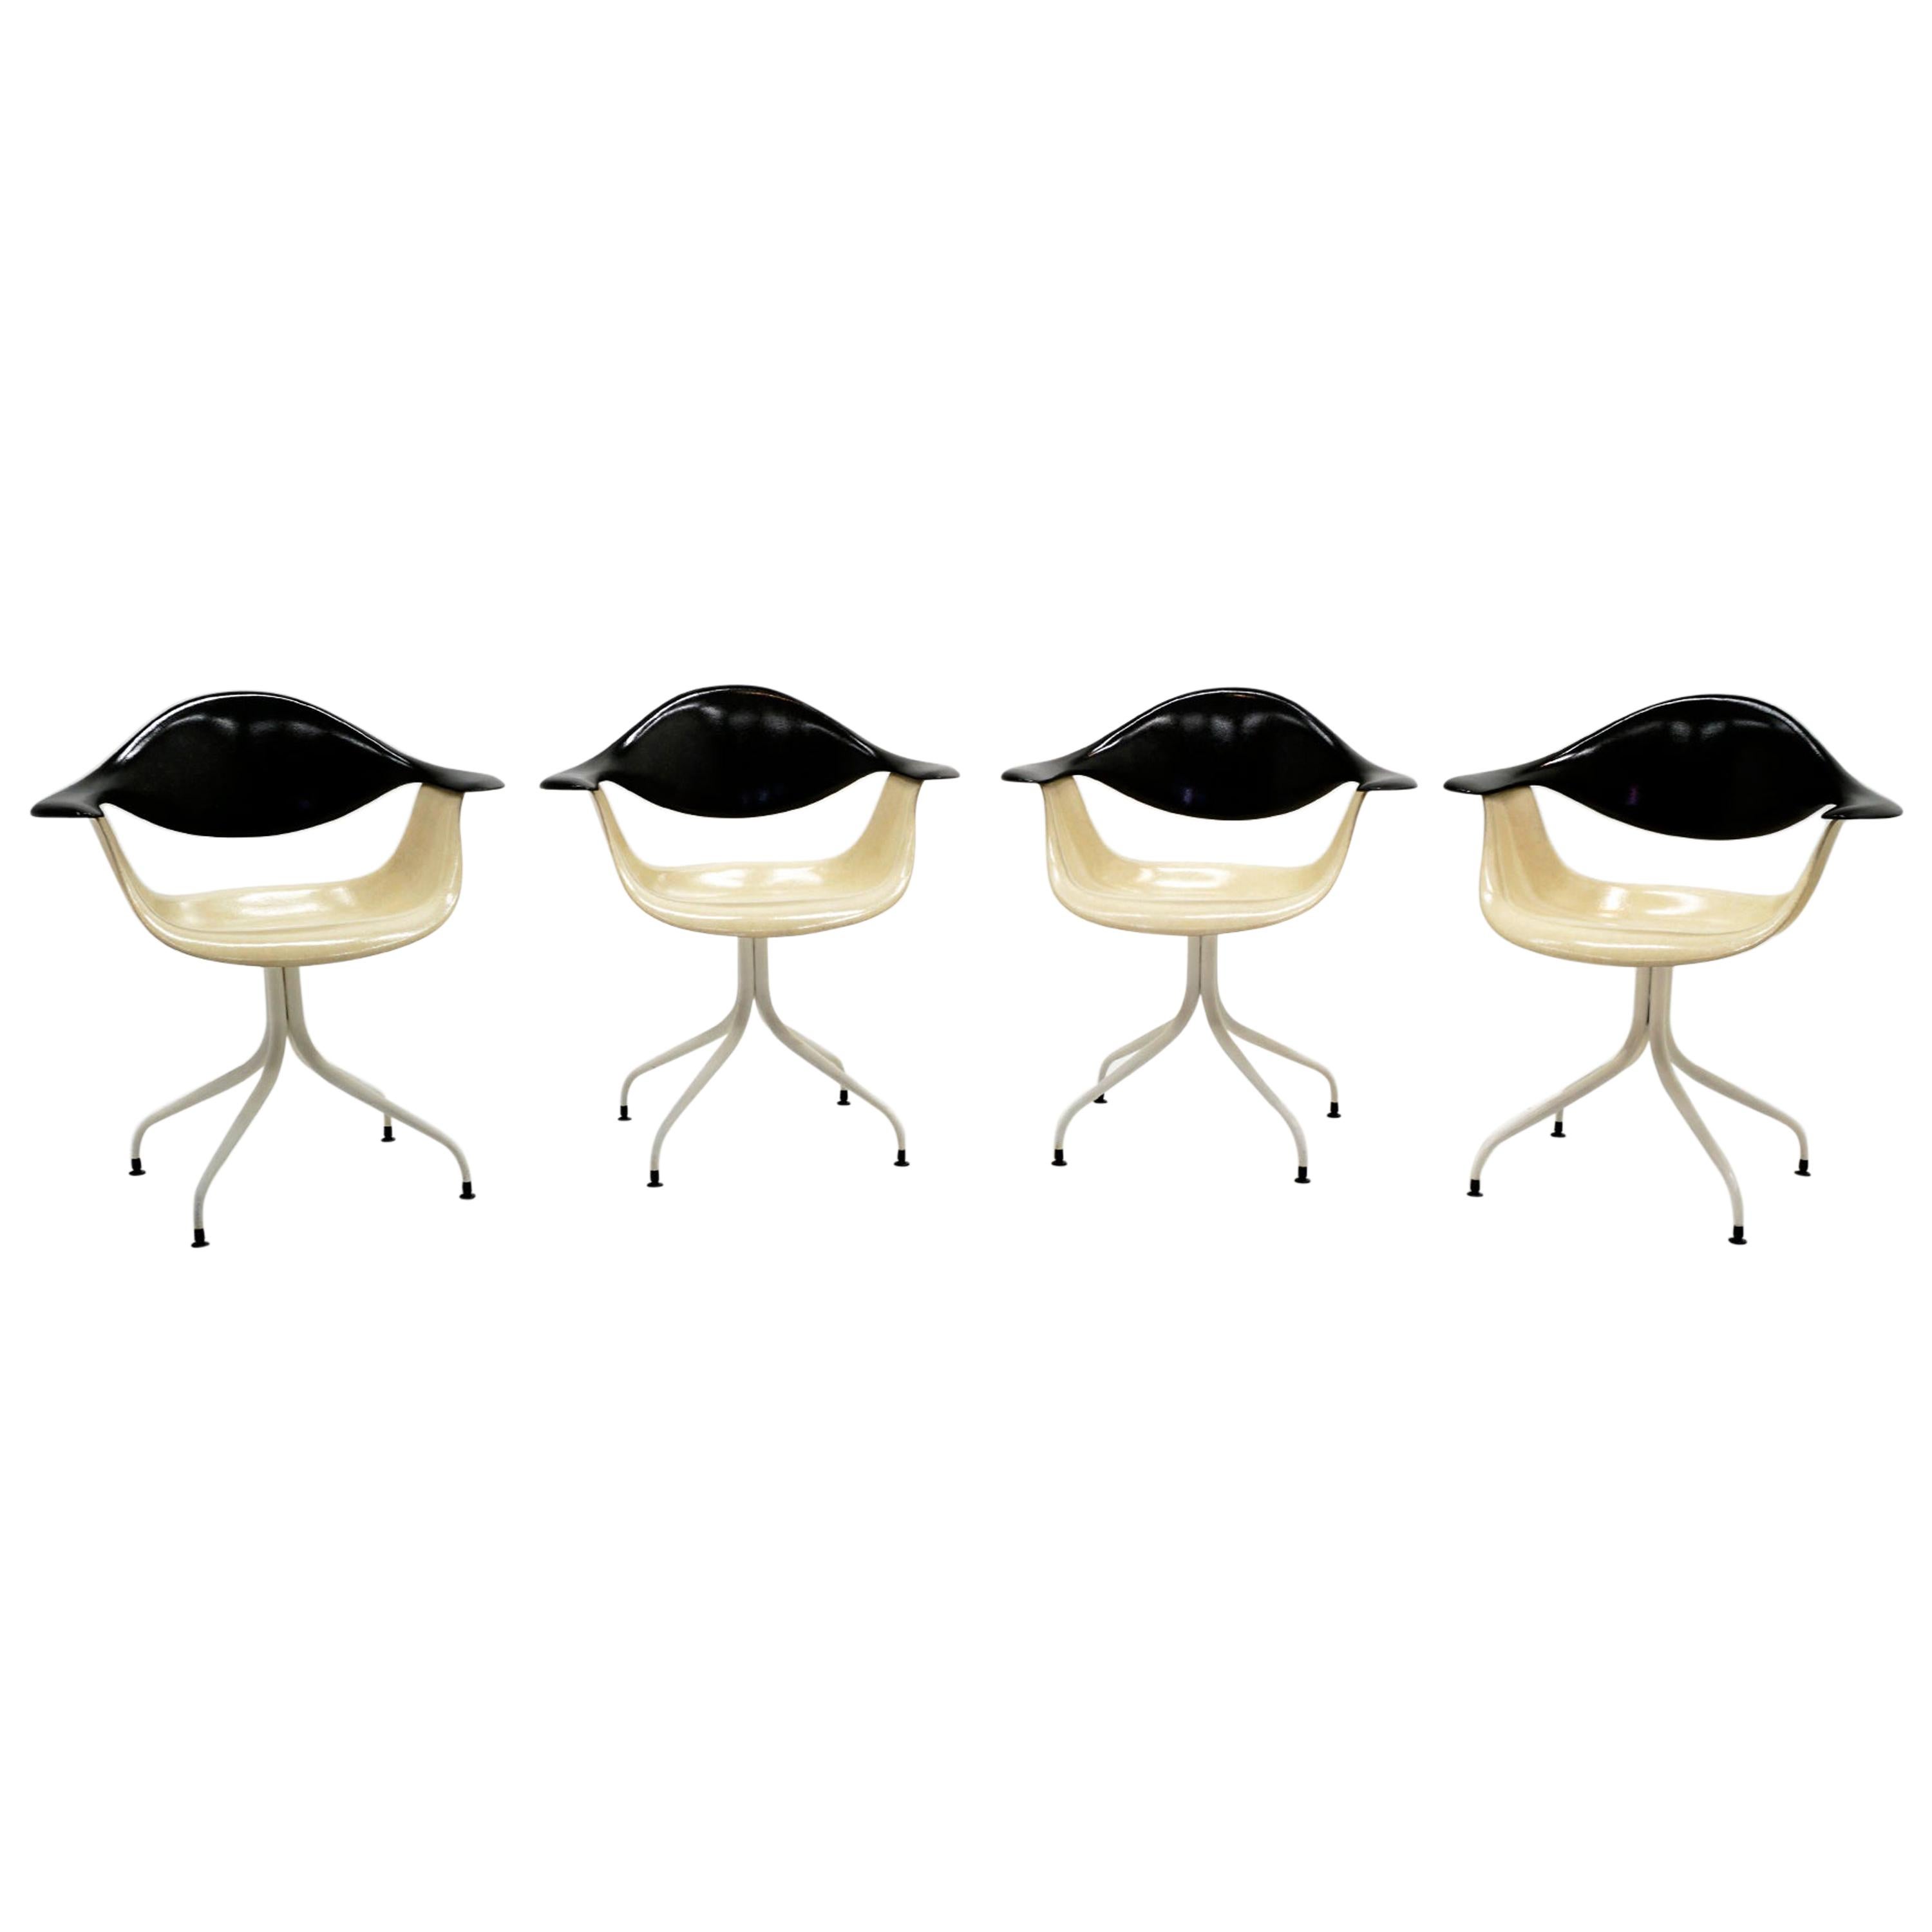 Four Swag Leg Chairs by George Nelson, Model DAF, 1958, Original Beige and Black